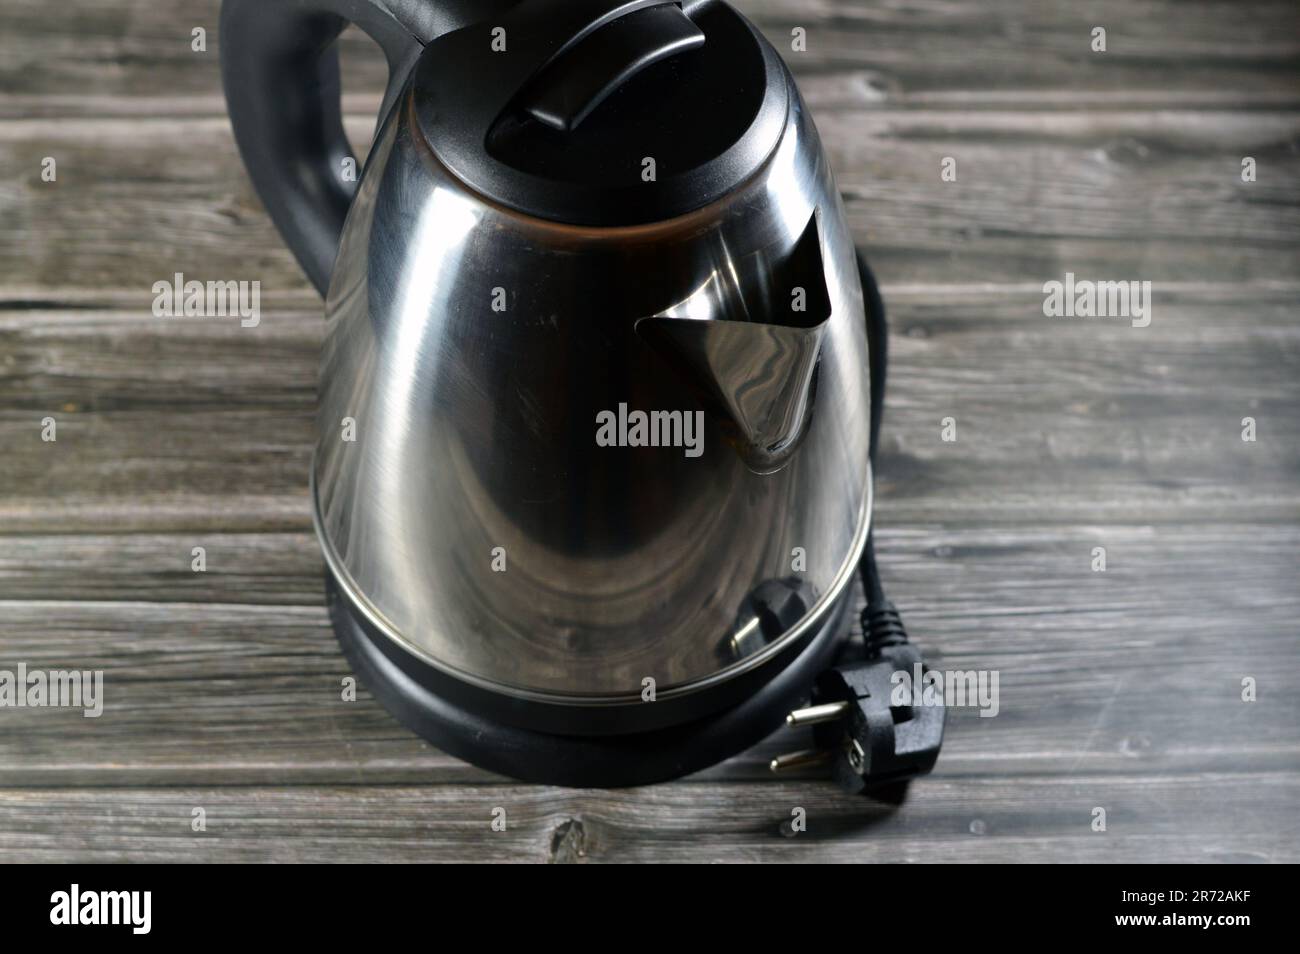 https://c8.alamy.com/comp/2R72AKF/speed-boil-water-electric-kettle-15-liter-for-preparations-and-boiling-water-by-electricity-for-tea-coffee-and-other-hot-drinks-electric-teapot-fo-2R72AKF.jpg